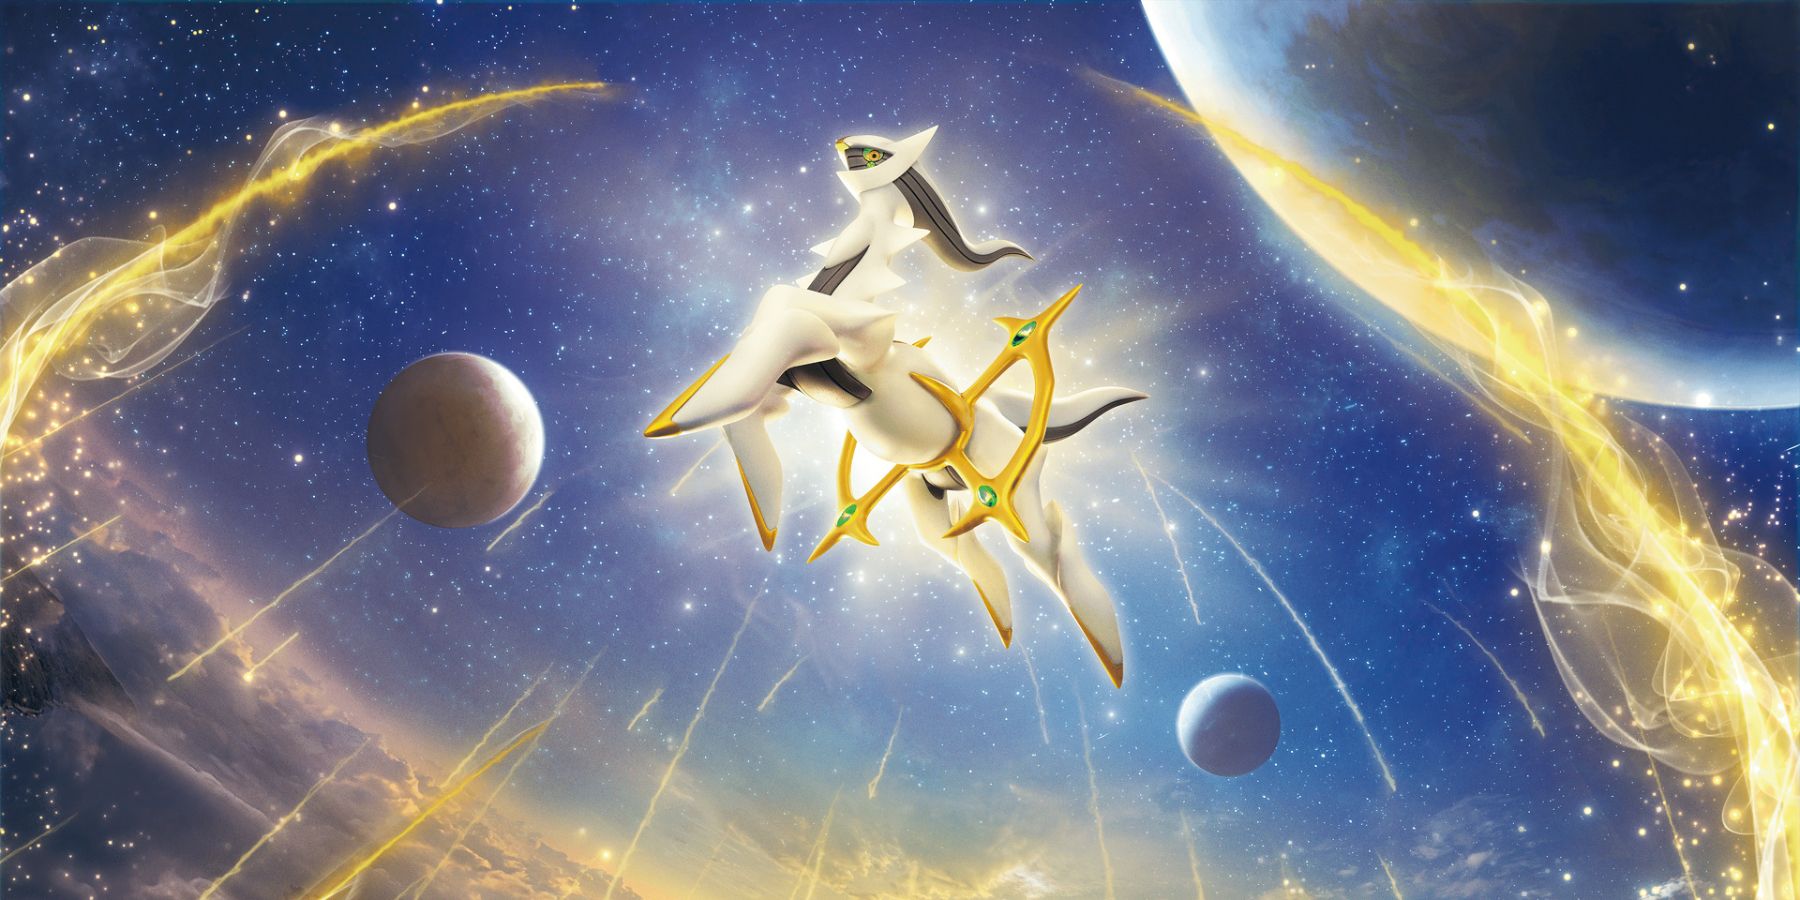 The competitively viable Arceus VSTAR/Flying Pikachu VMAX deck has some expensive cards.